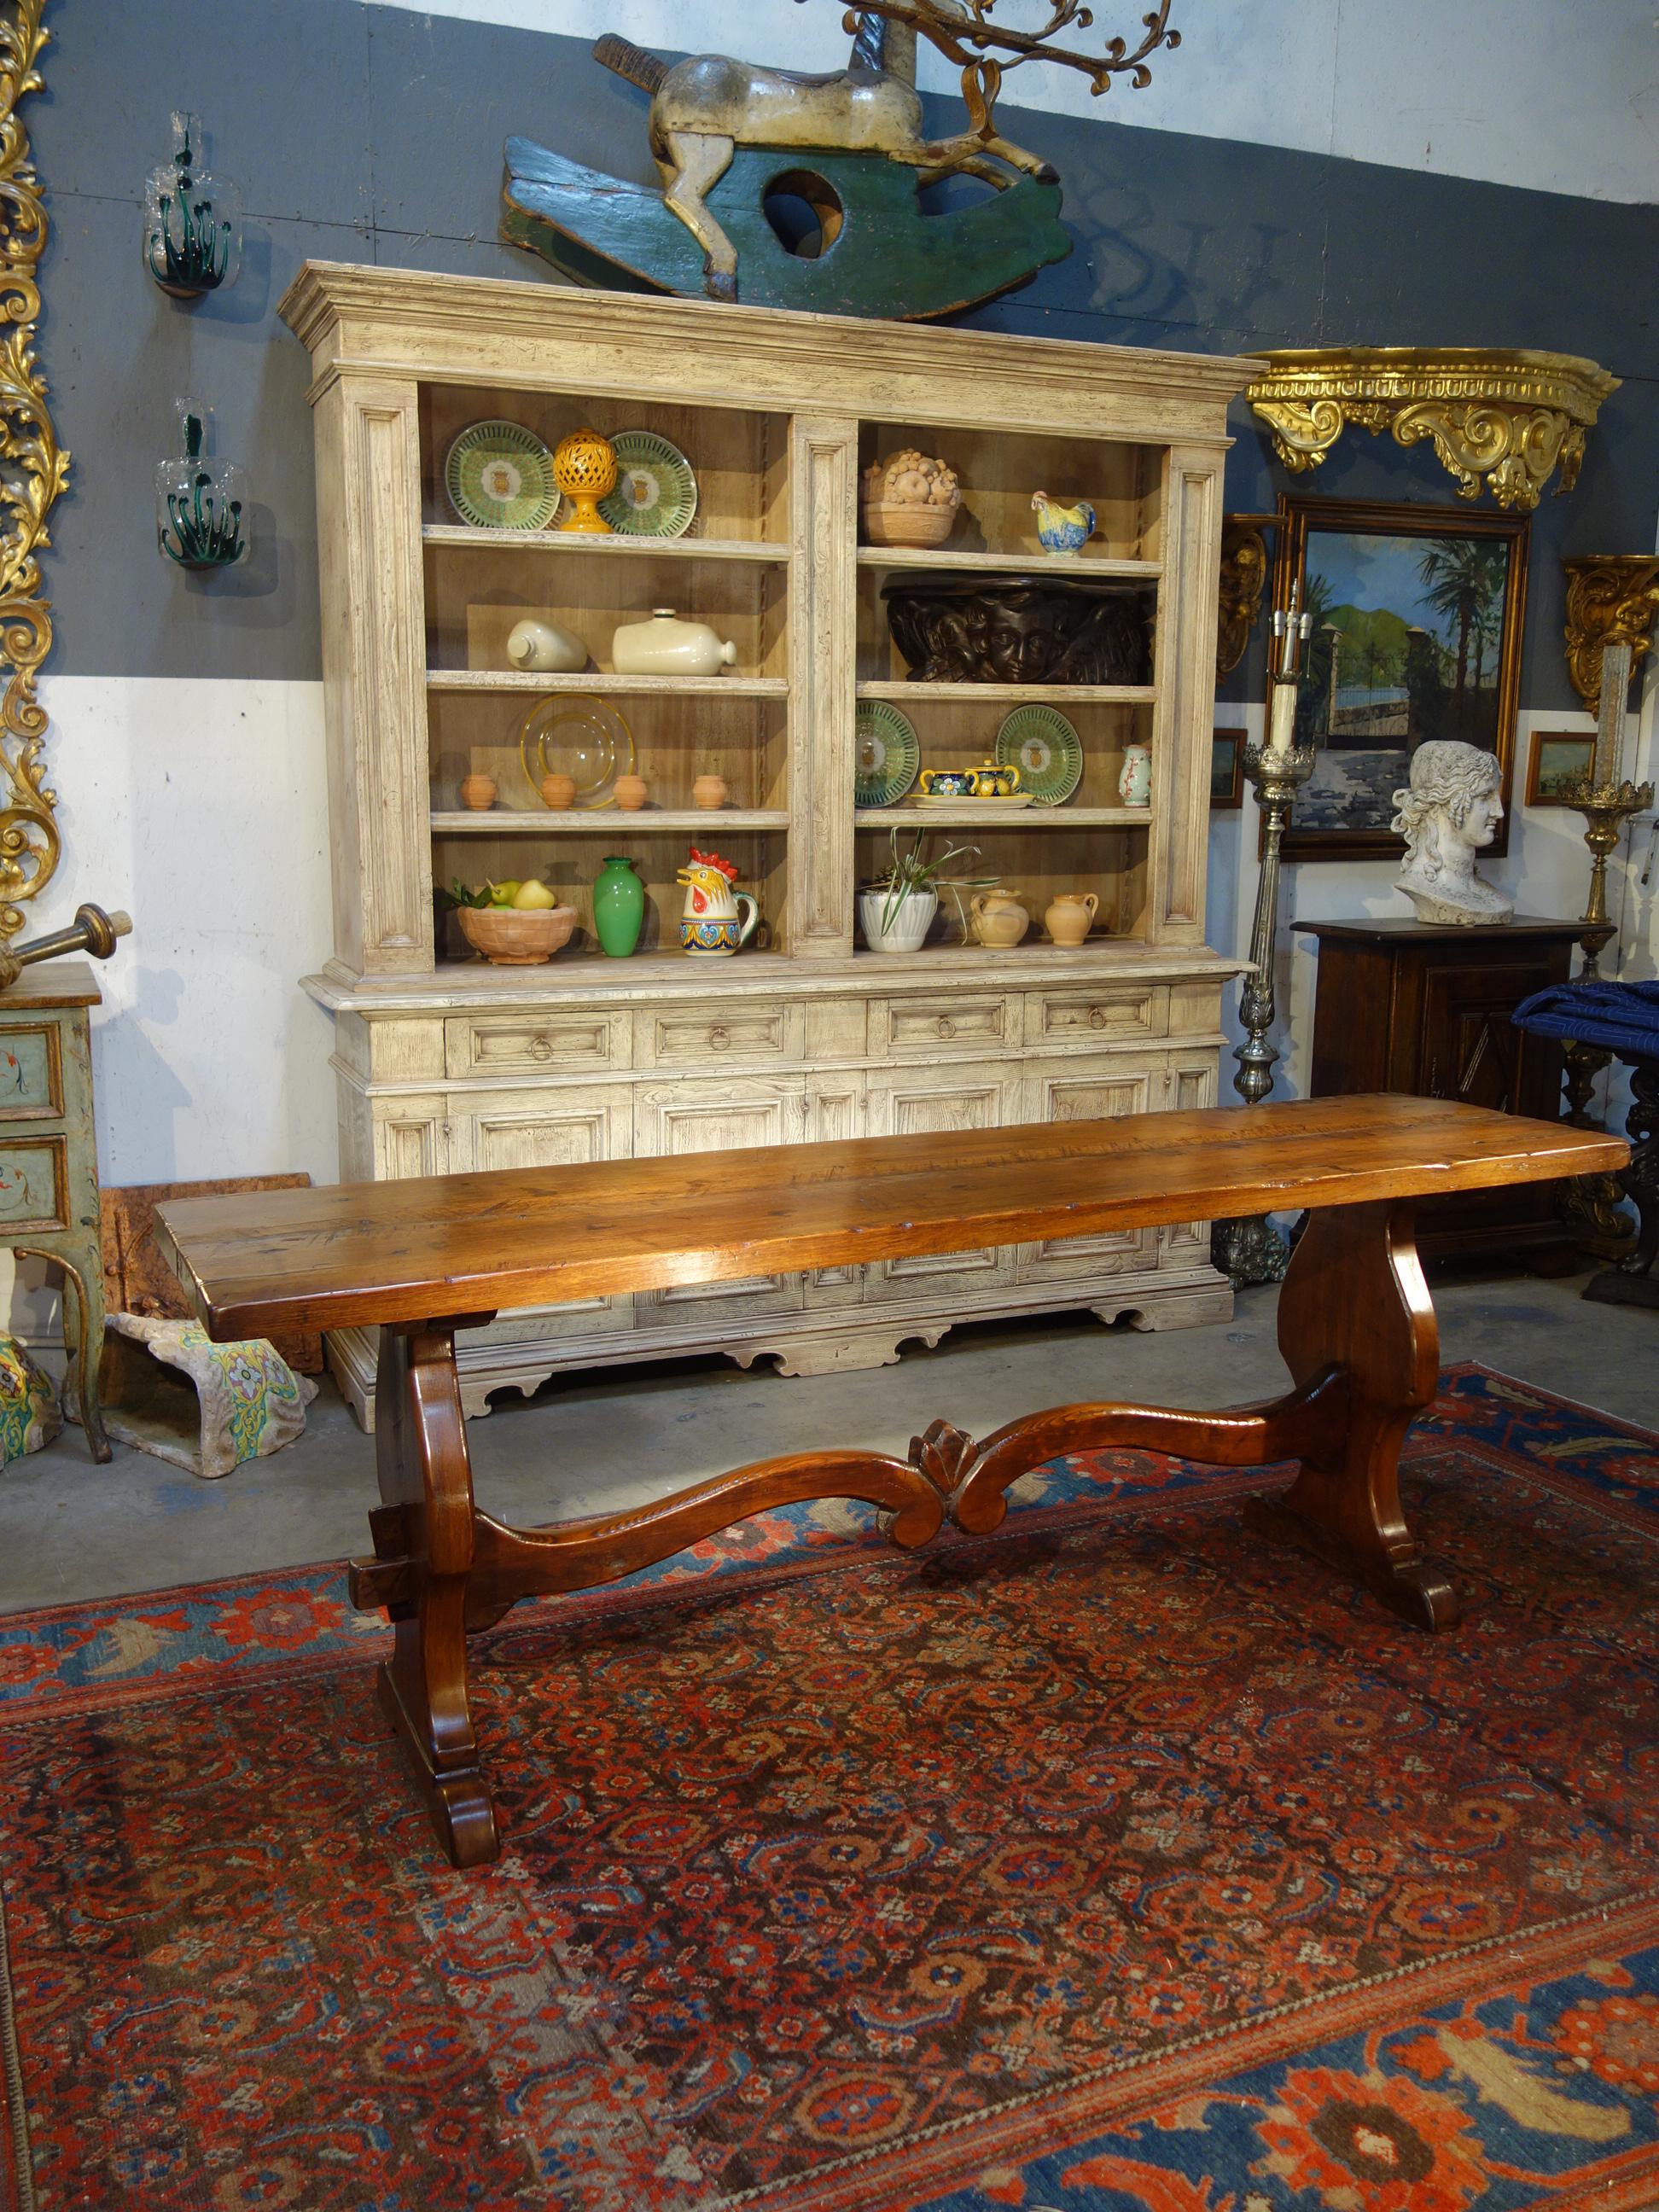 Majestic antique Italian refectory style console table with solid Italian Walnut 2-slab top and carved Frattino bases with cross stretcher, Circa 1840. Classic Renaissance shellac preservation finish & protective wax. Perfect for console, server,